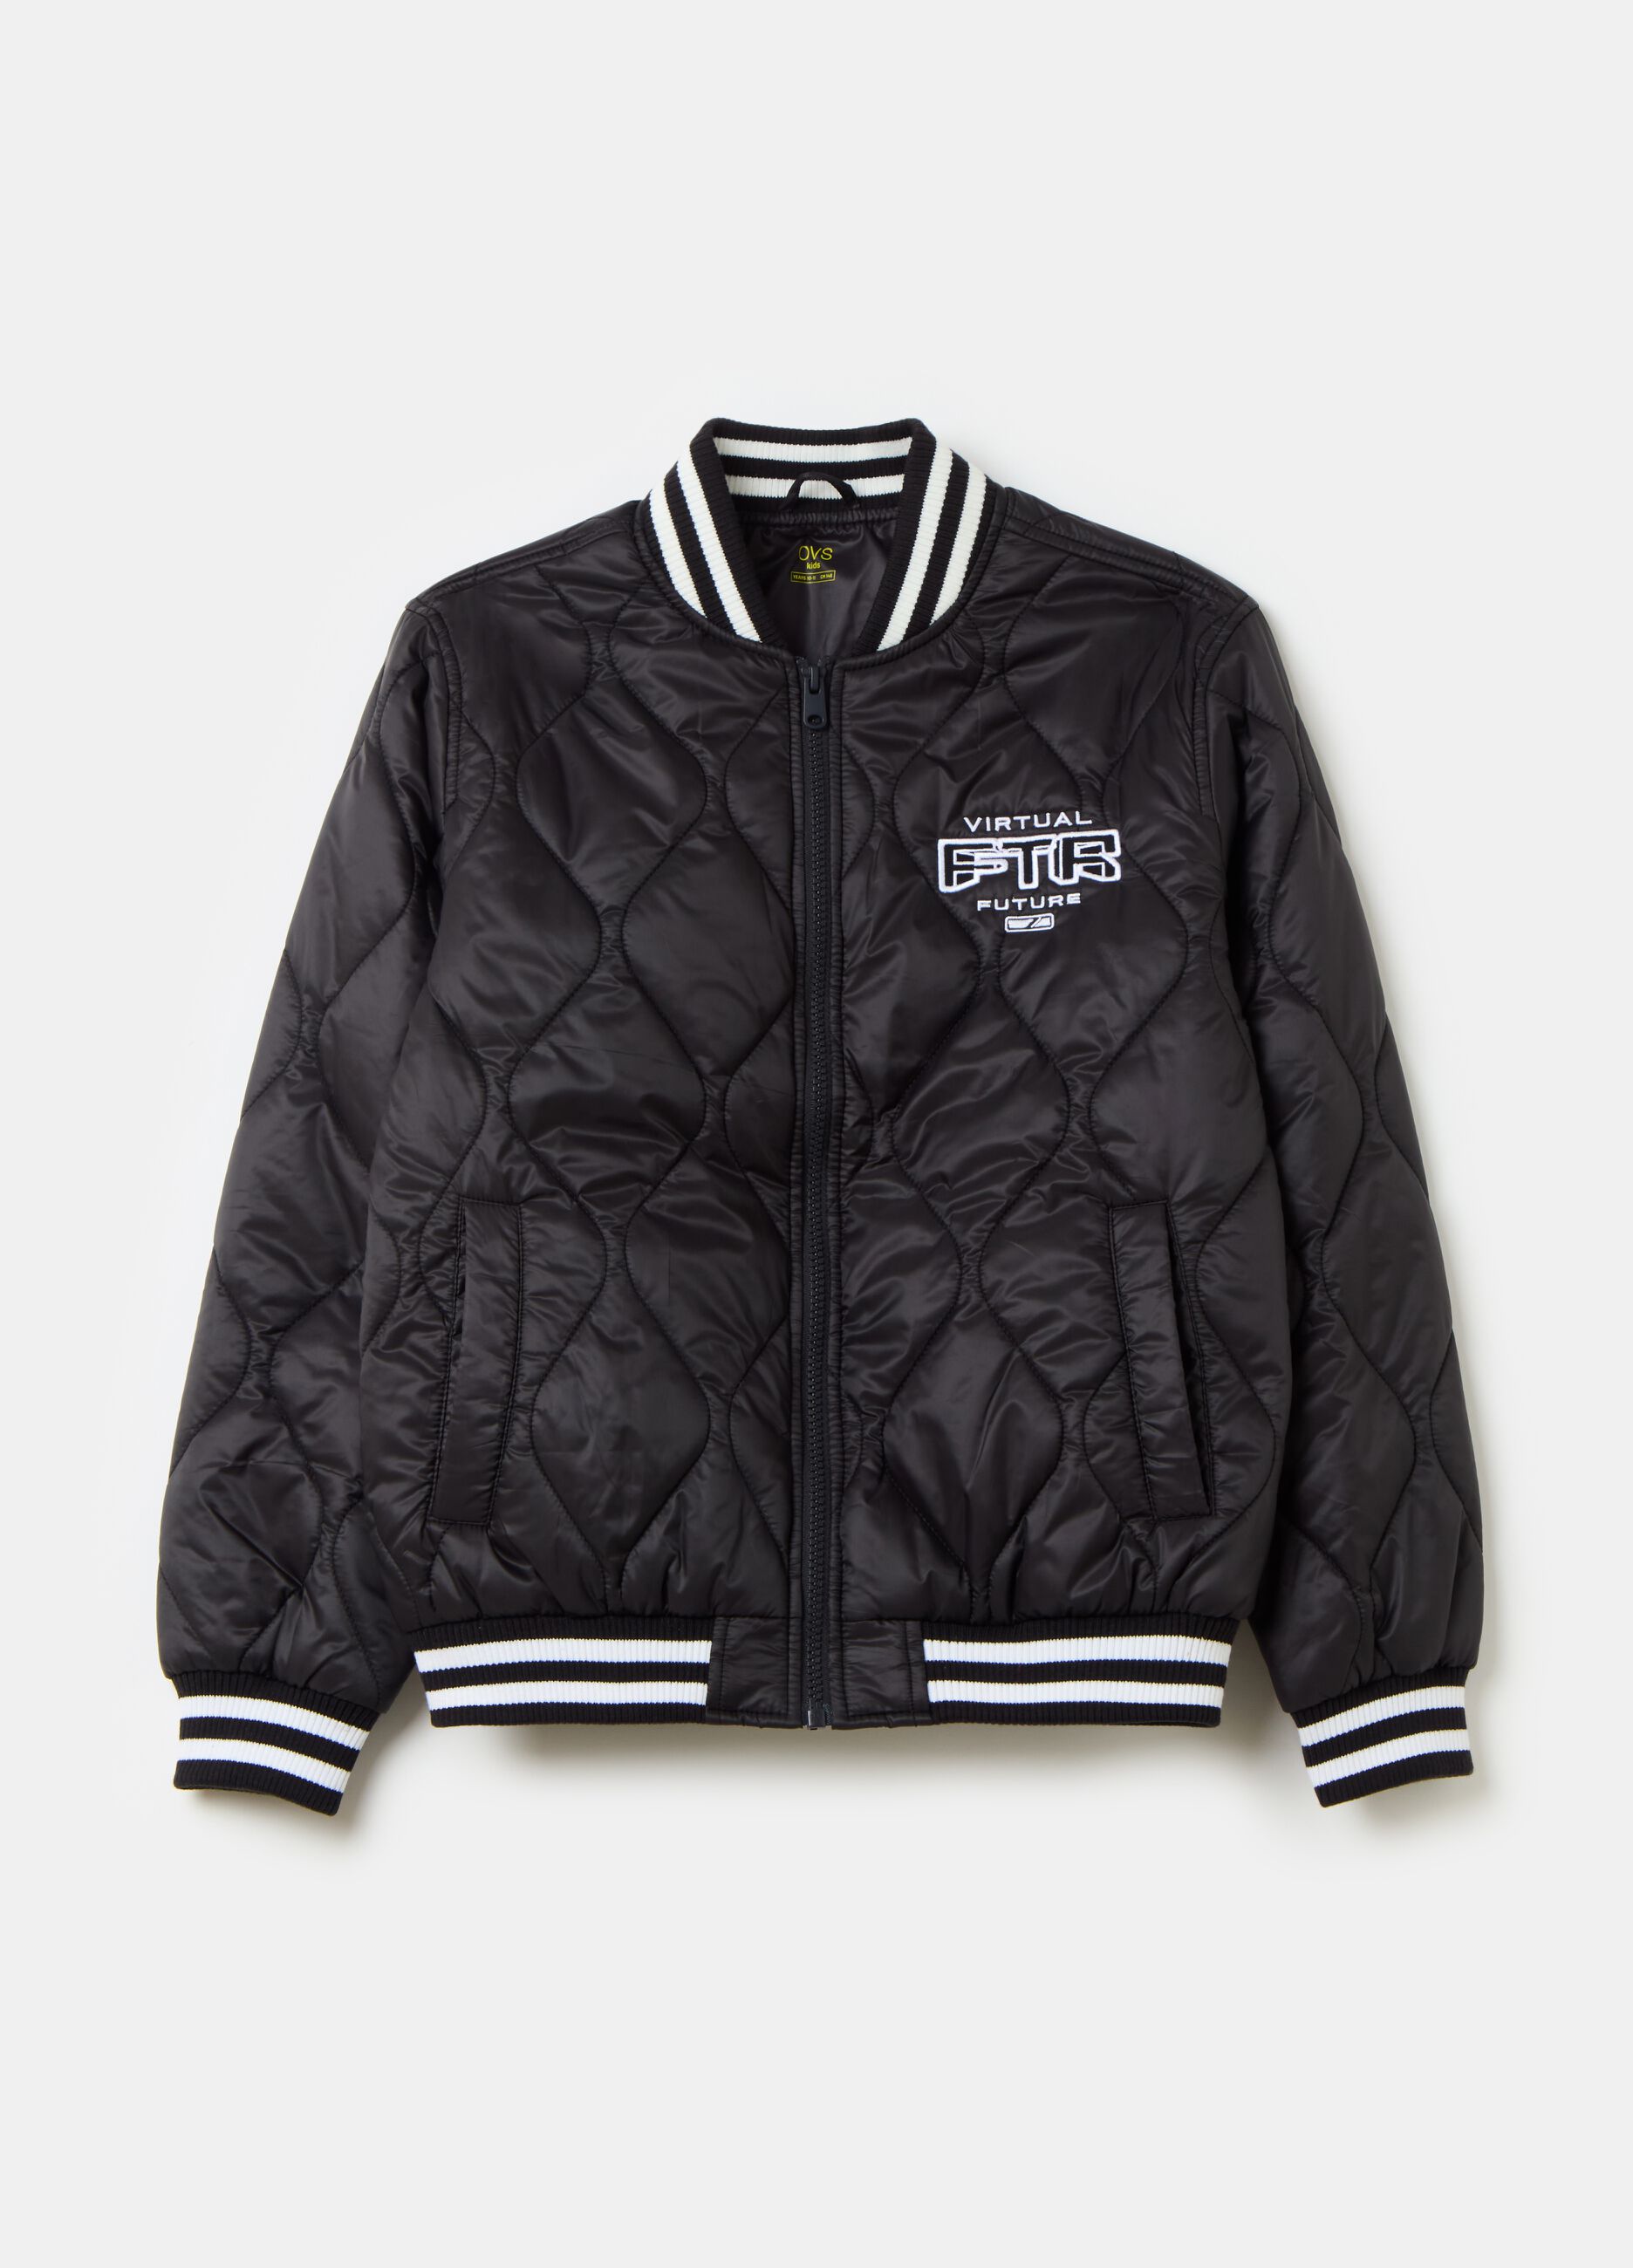 Ultralight bomber jacket with lettering embroidery